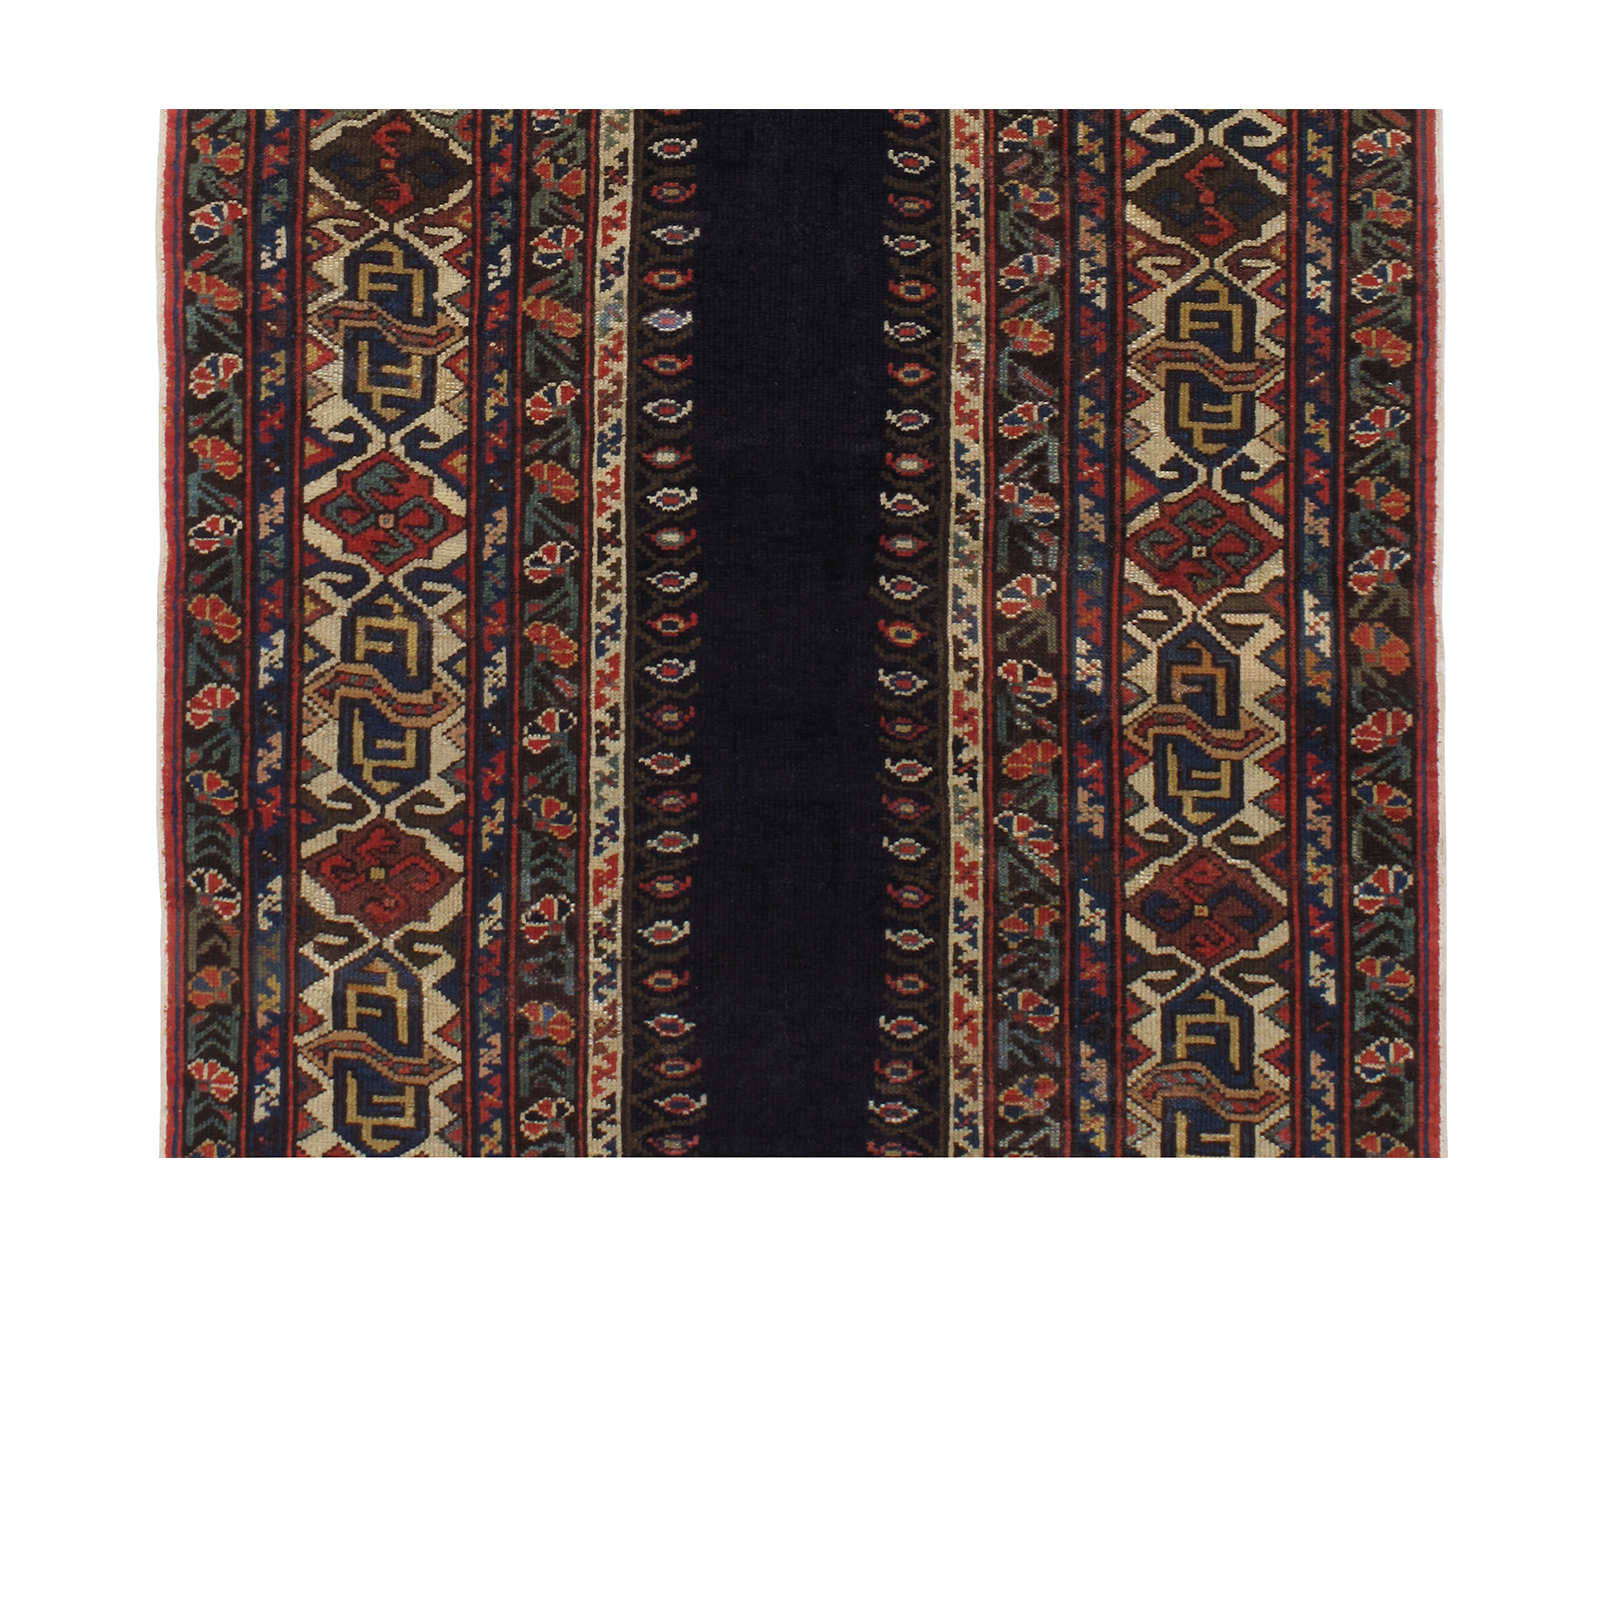 This Talish rug is hand-knotted and made of 100% wool.